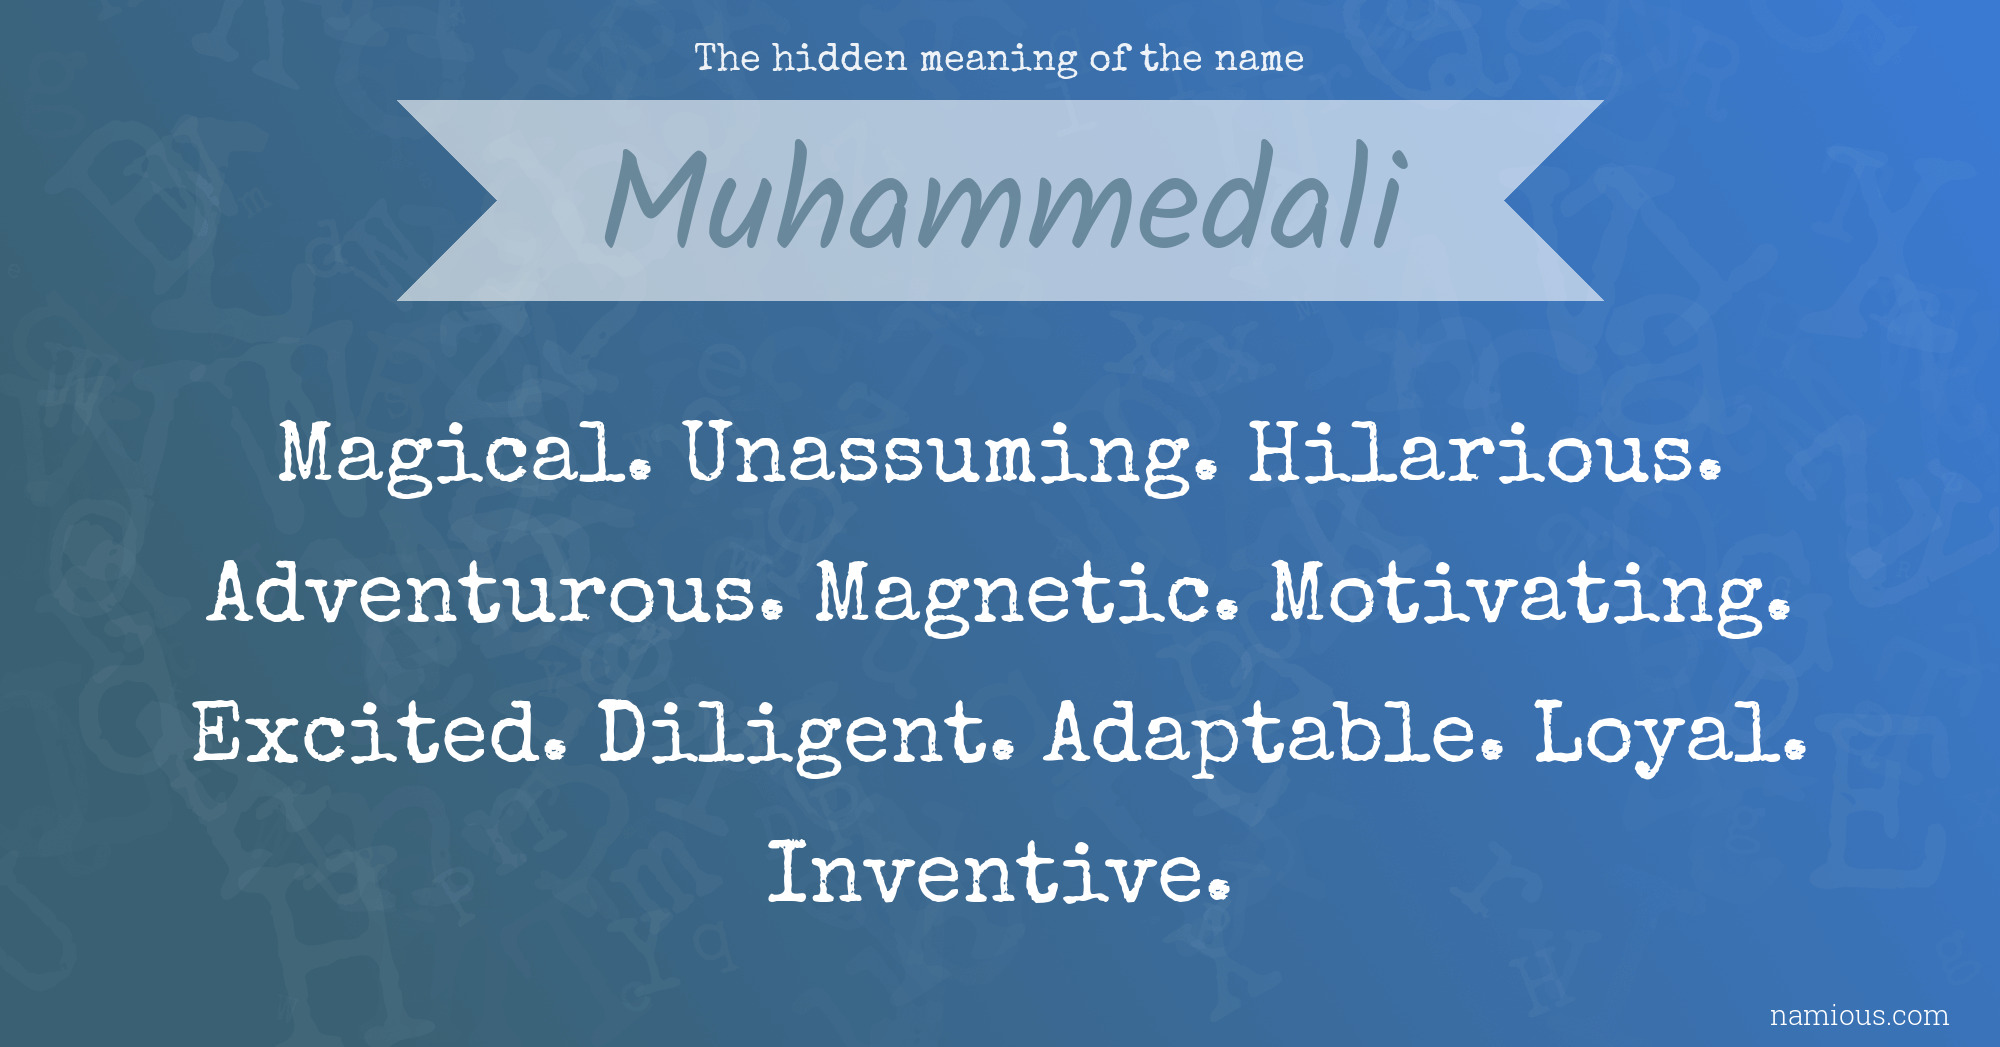 The hidden meaning of the name Muhammedali